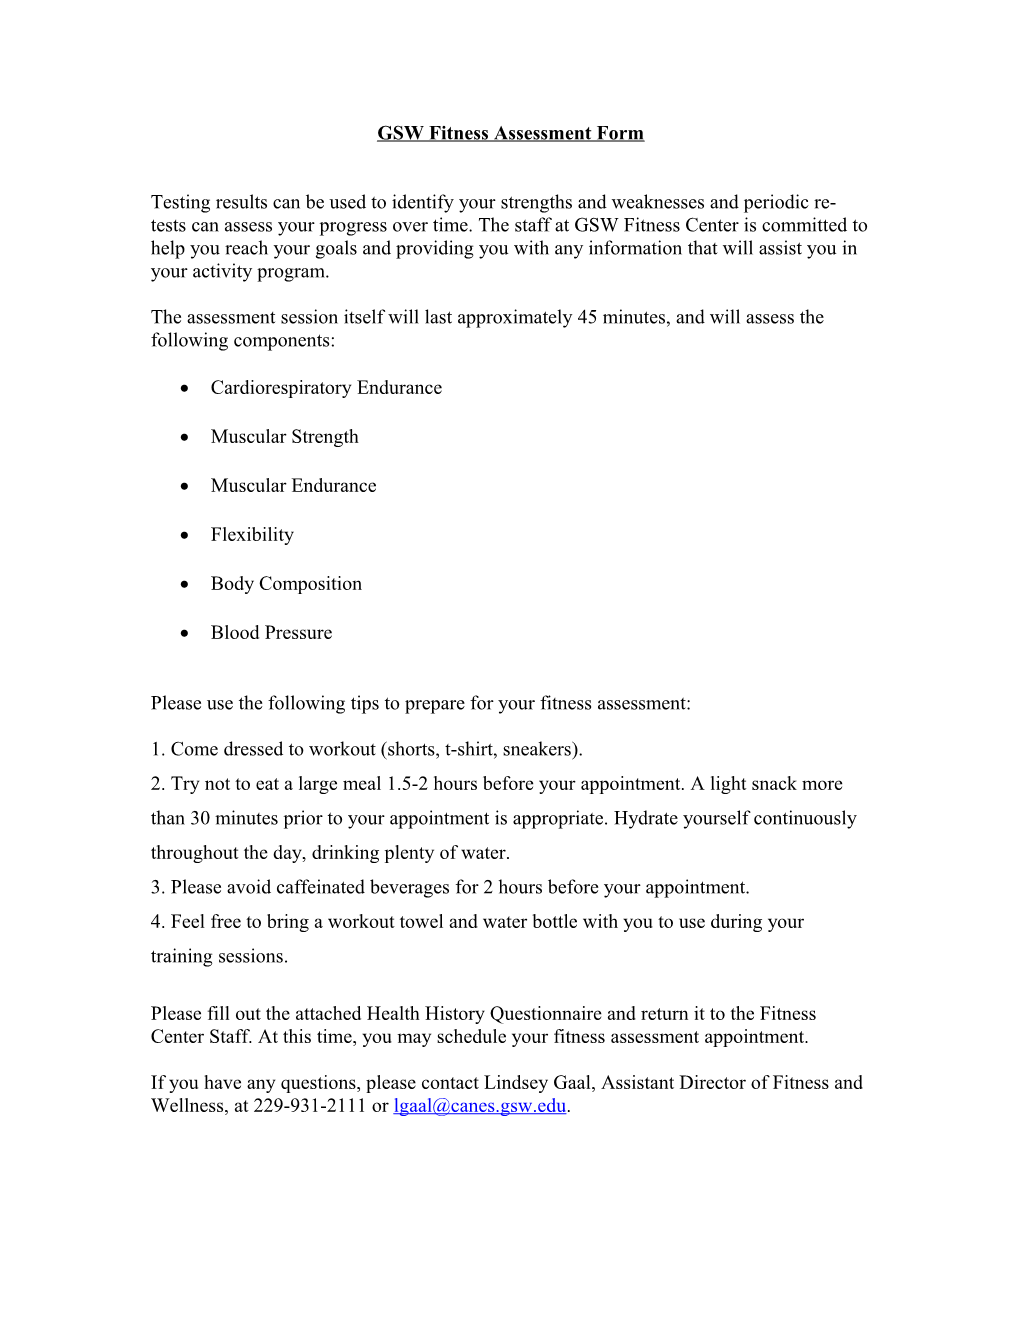 GSW Fitness Assessment Form